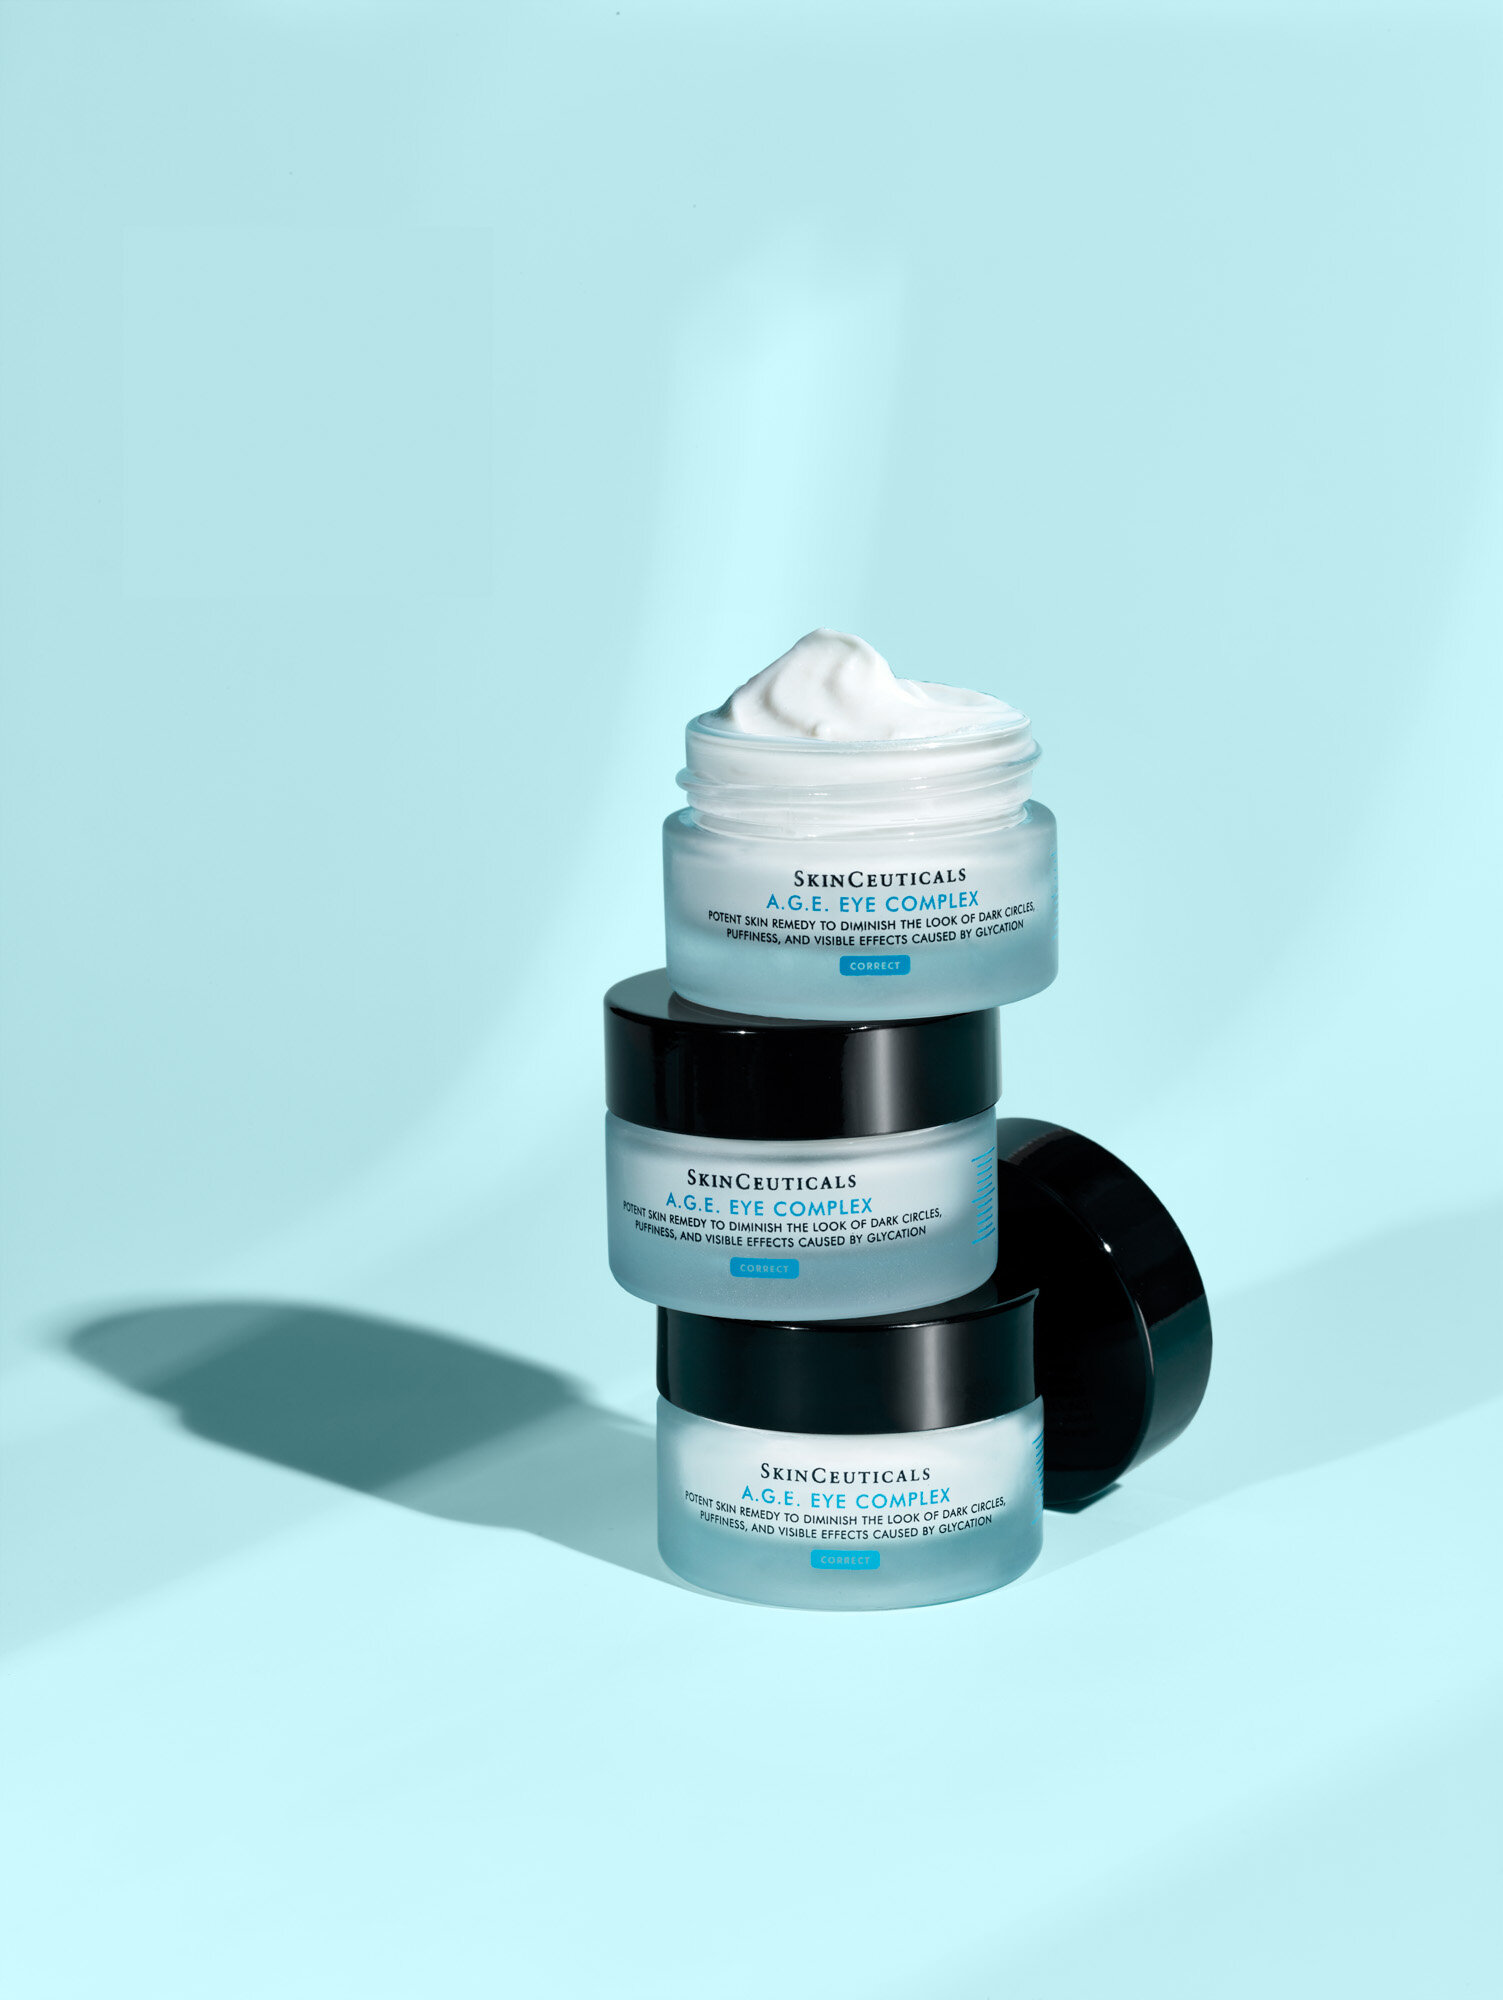 200227_Skinceuticals_19_AGE_Eye_Complex_Product_D.JPG